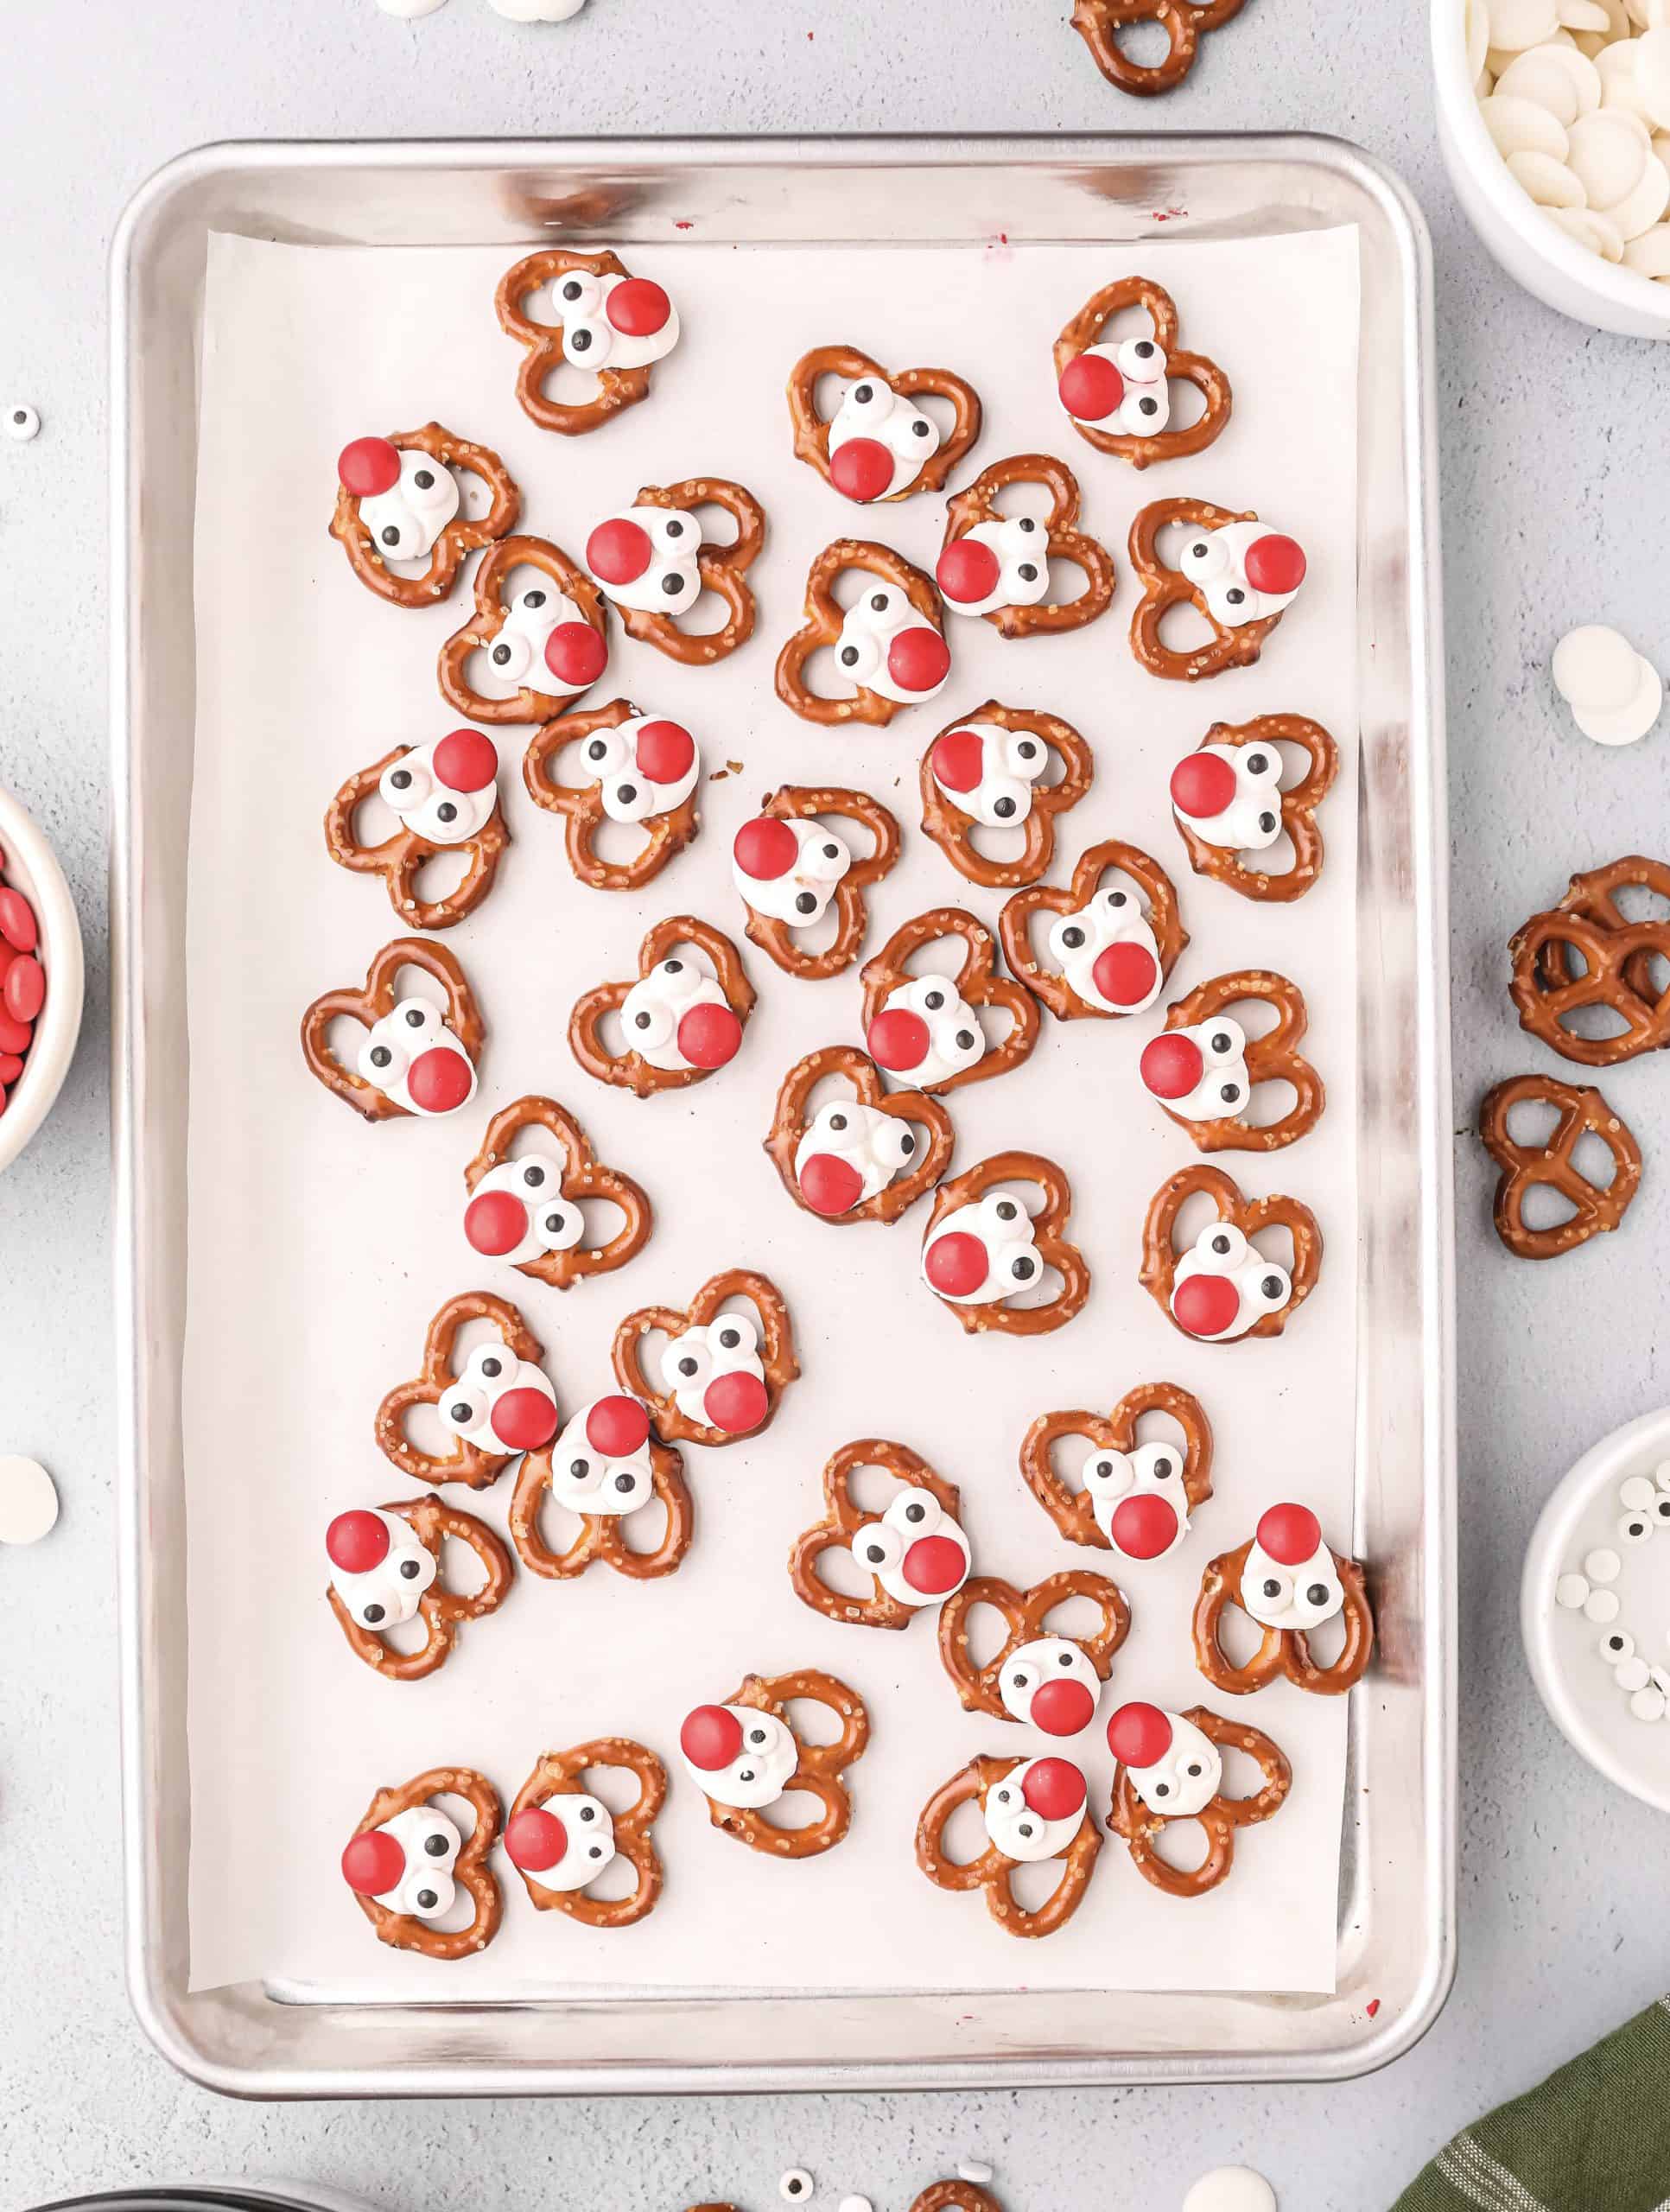 mini pretzels in a single layer with white chocolate dots and red m&m chocolate candies to make a reindeer looking pretzel on a baking sheet.